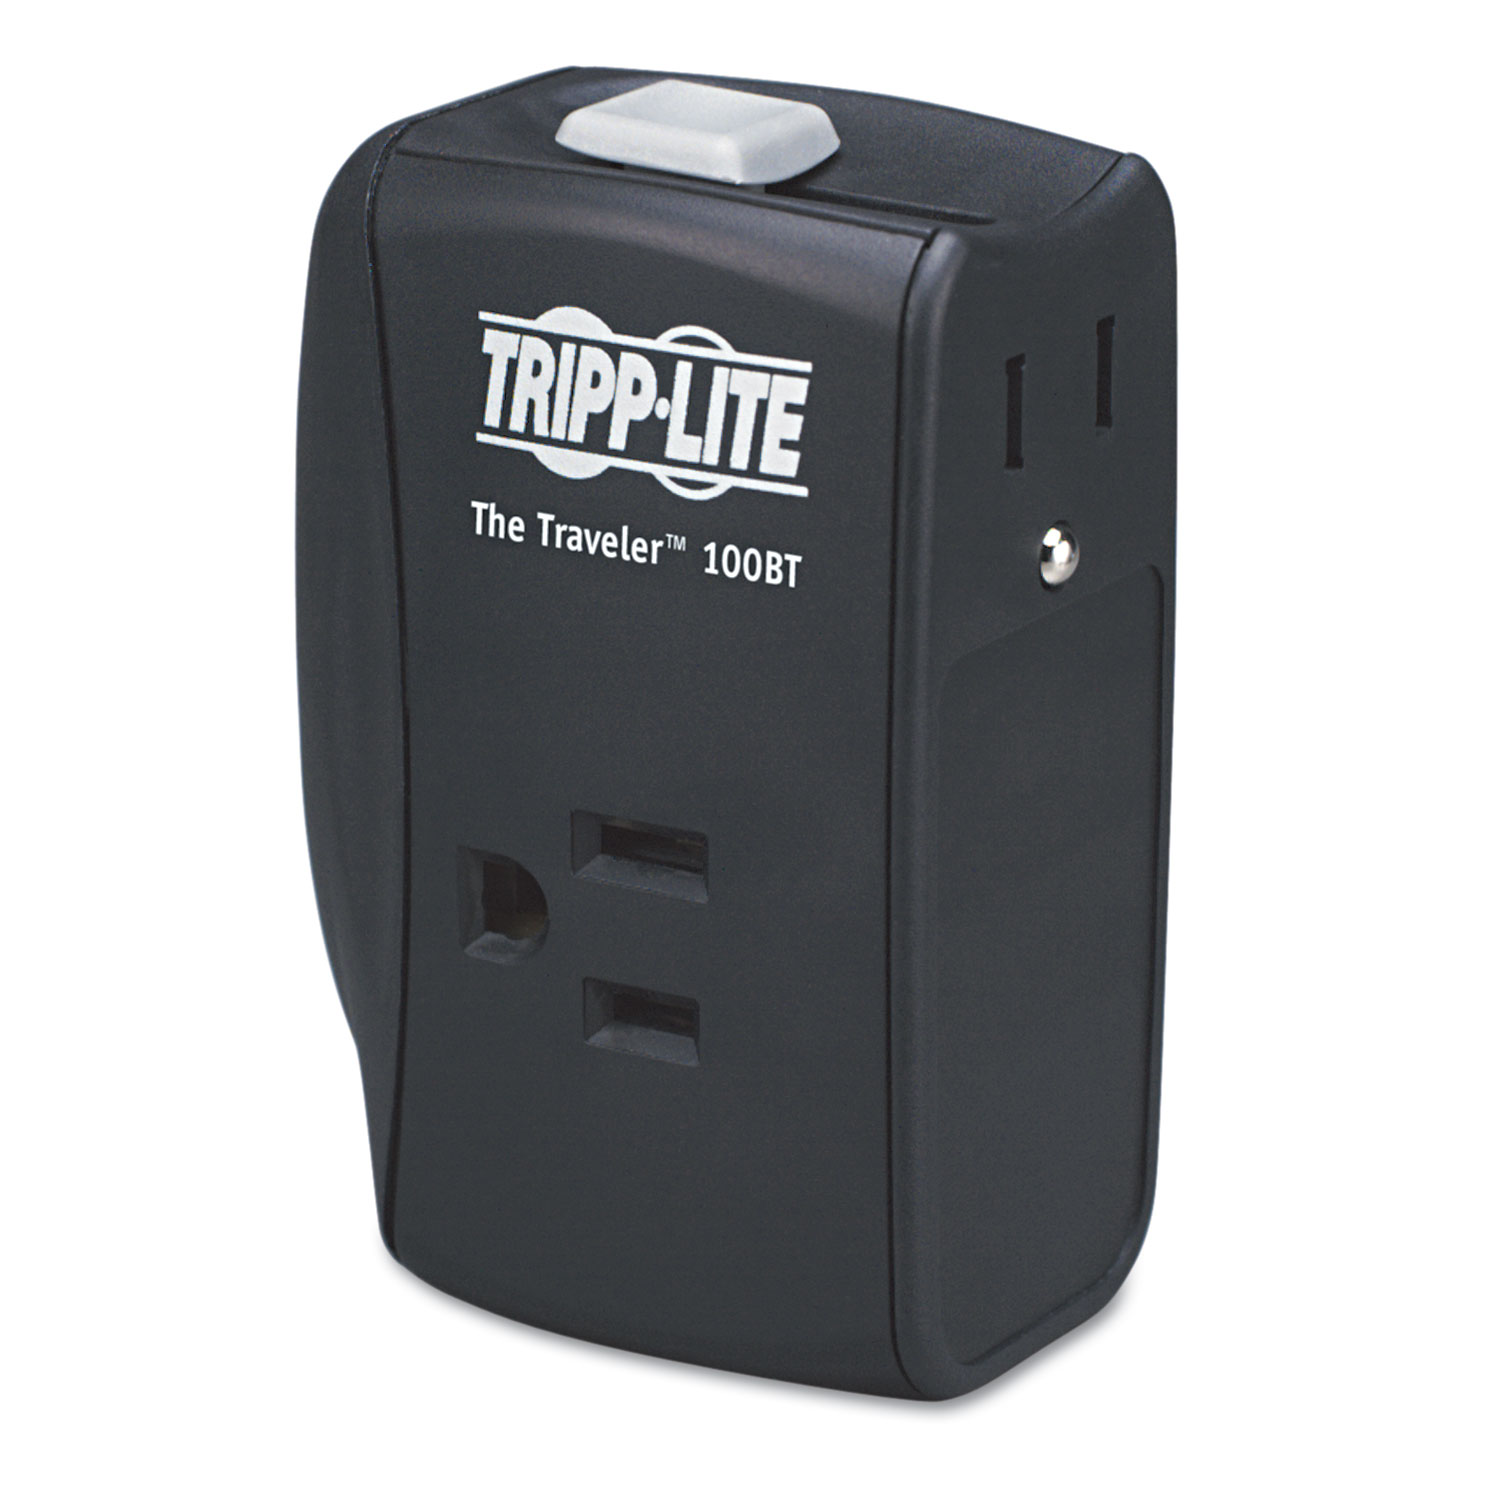 Protect It! Two-Outlet Portable Surge Suppressor, 1050 Joules, Black